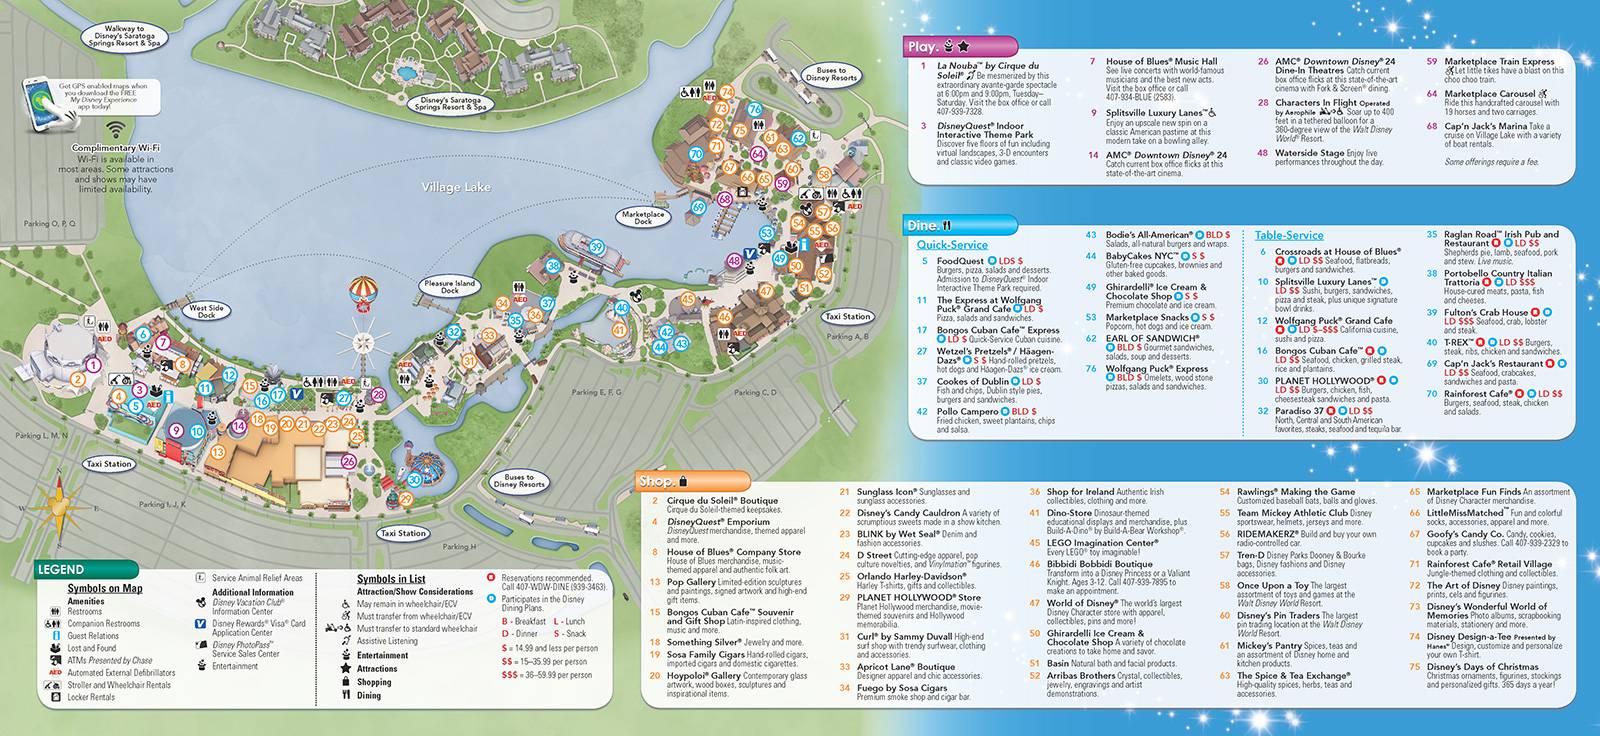 PHOTOS - New redesigned guidemaps and times guides now in the parks